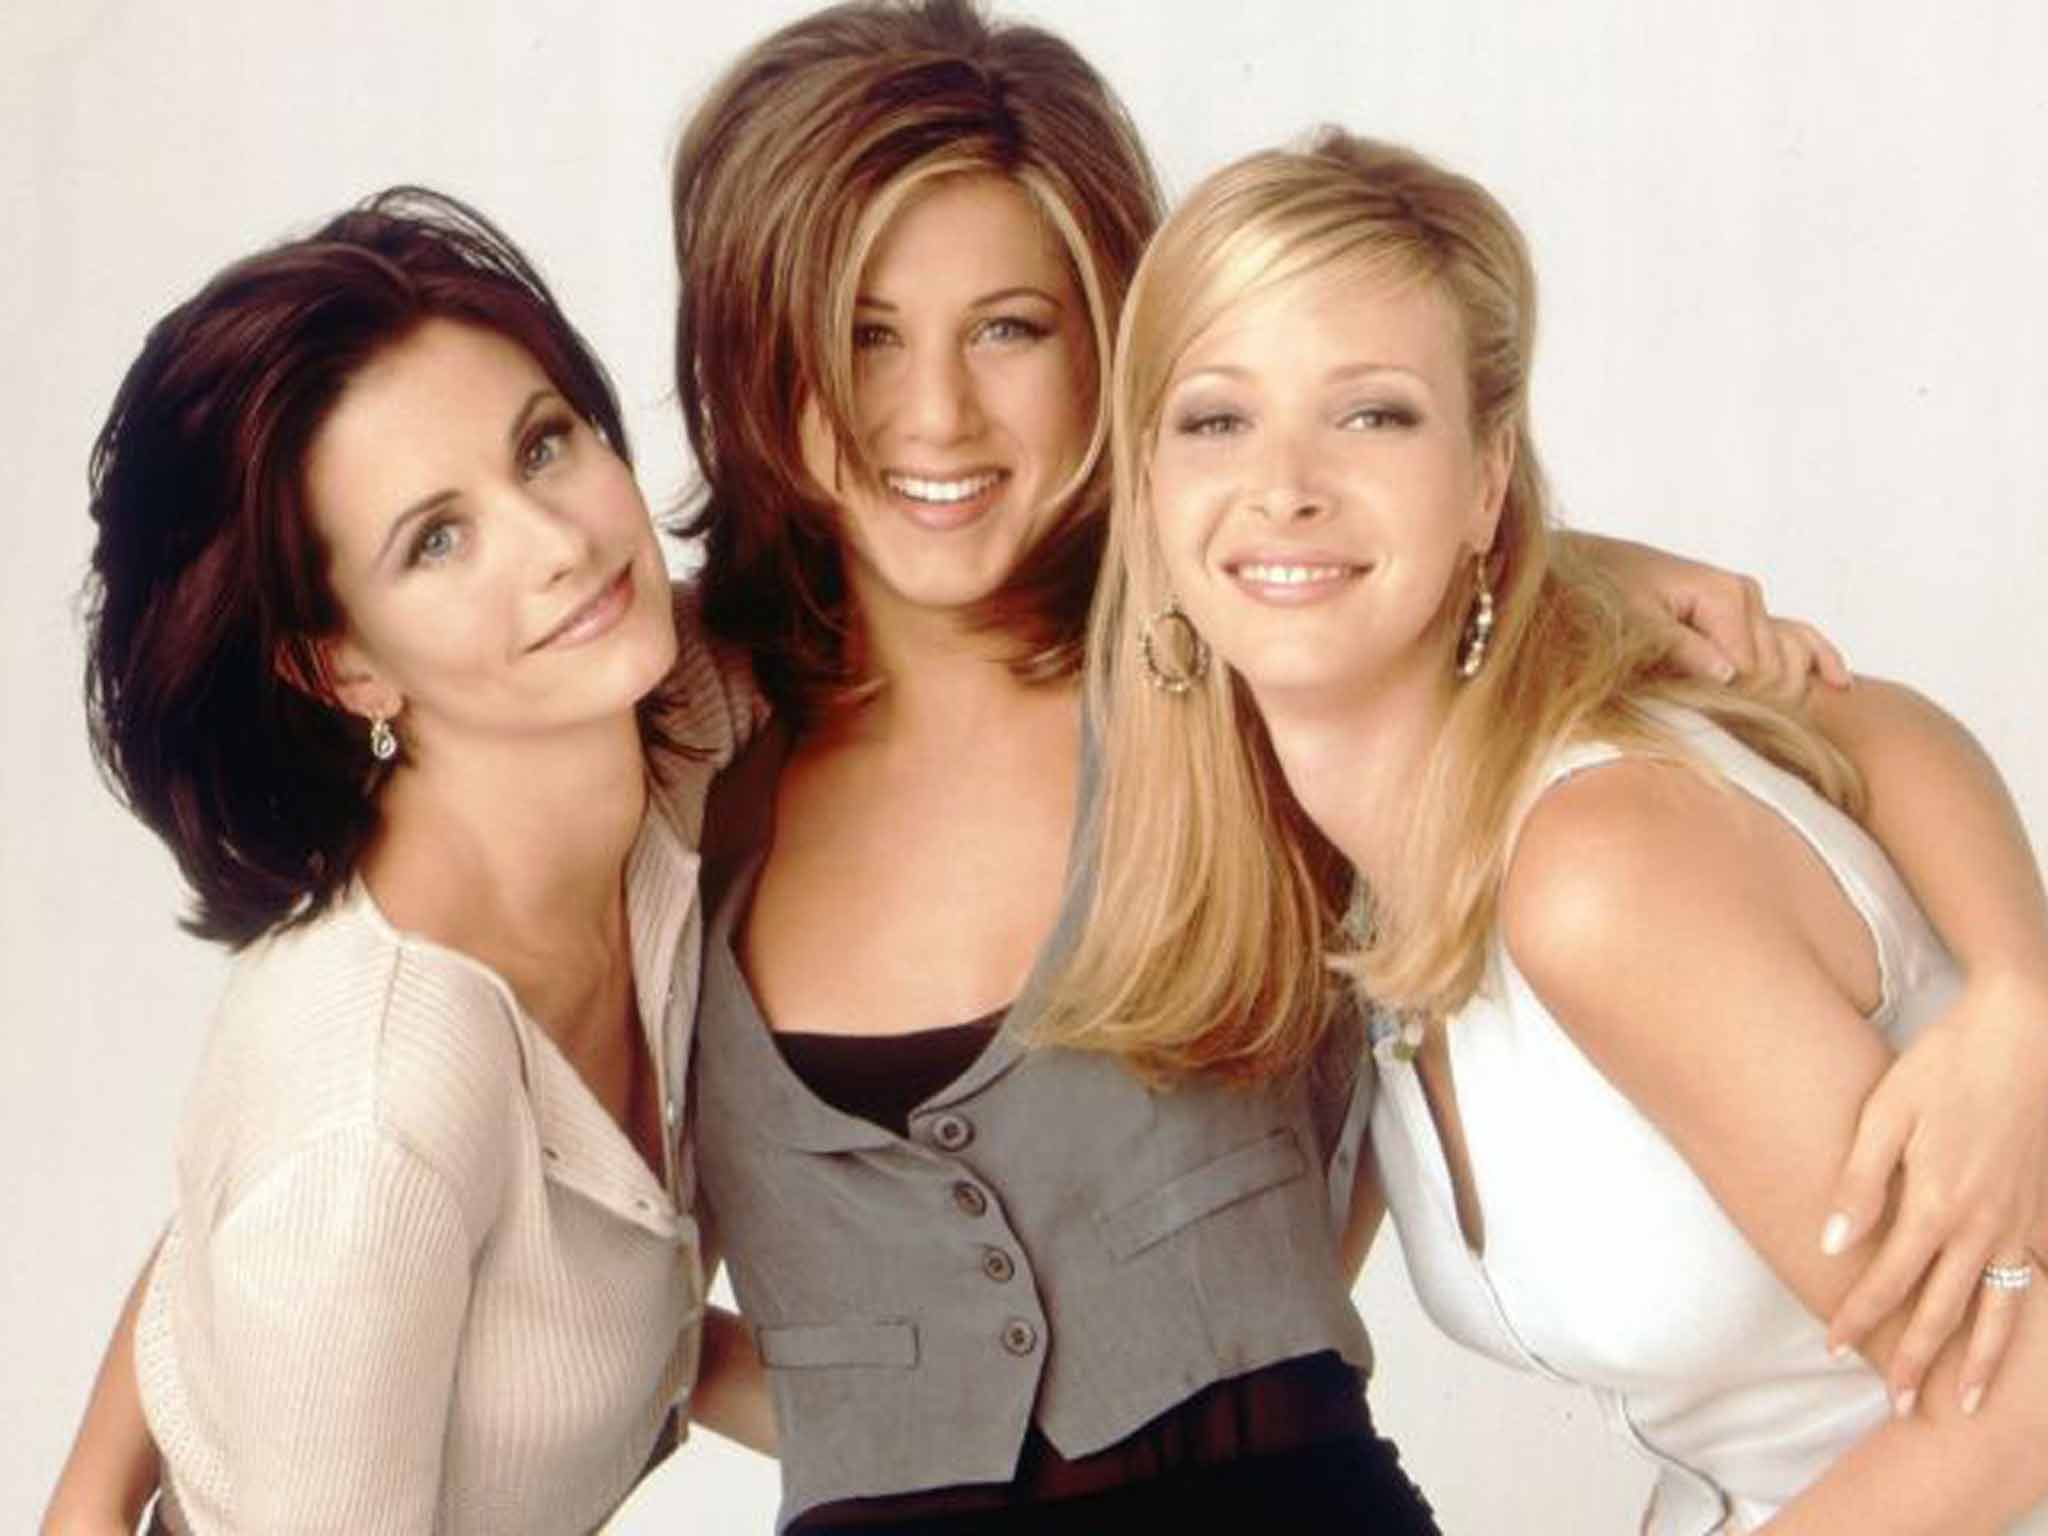 Friends: Every episode ranked | The Independent